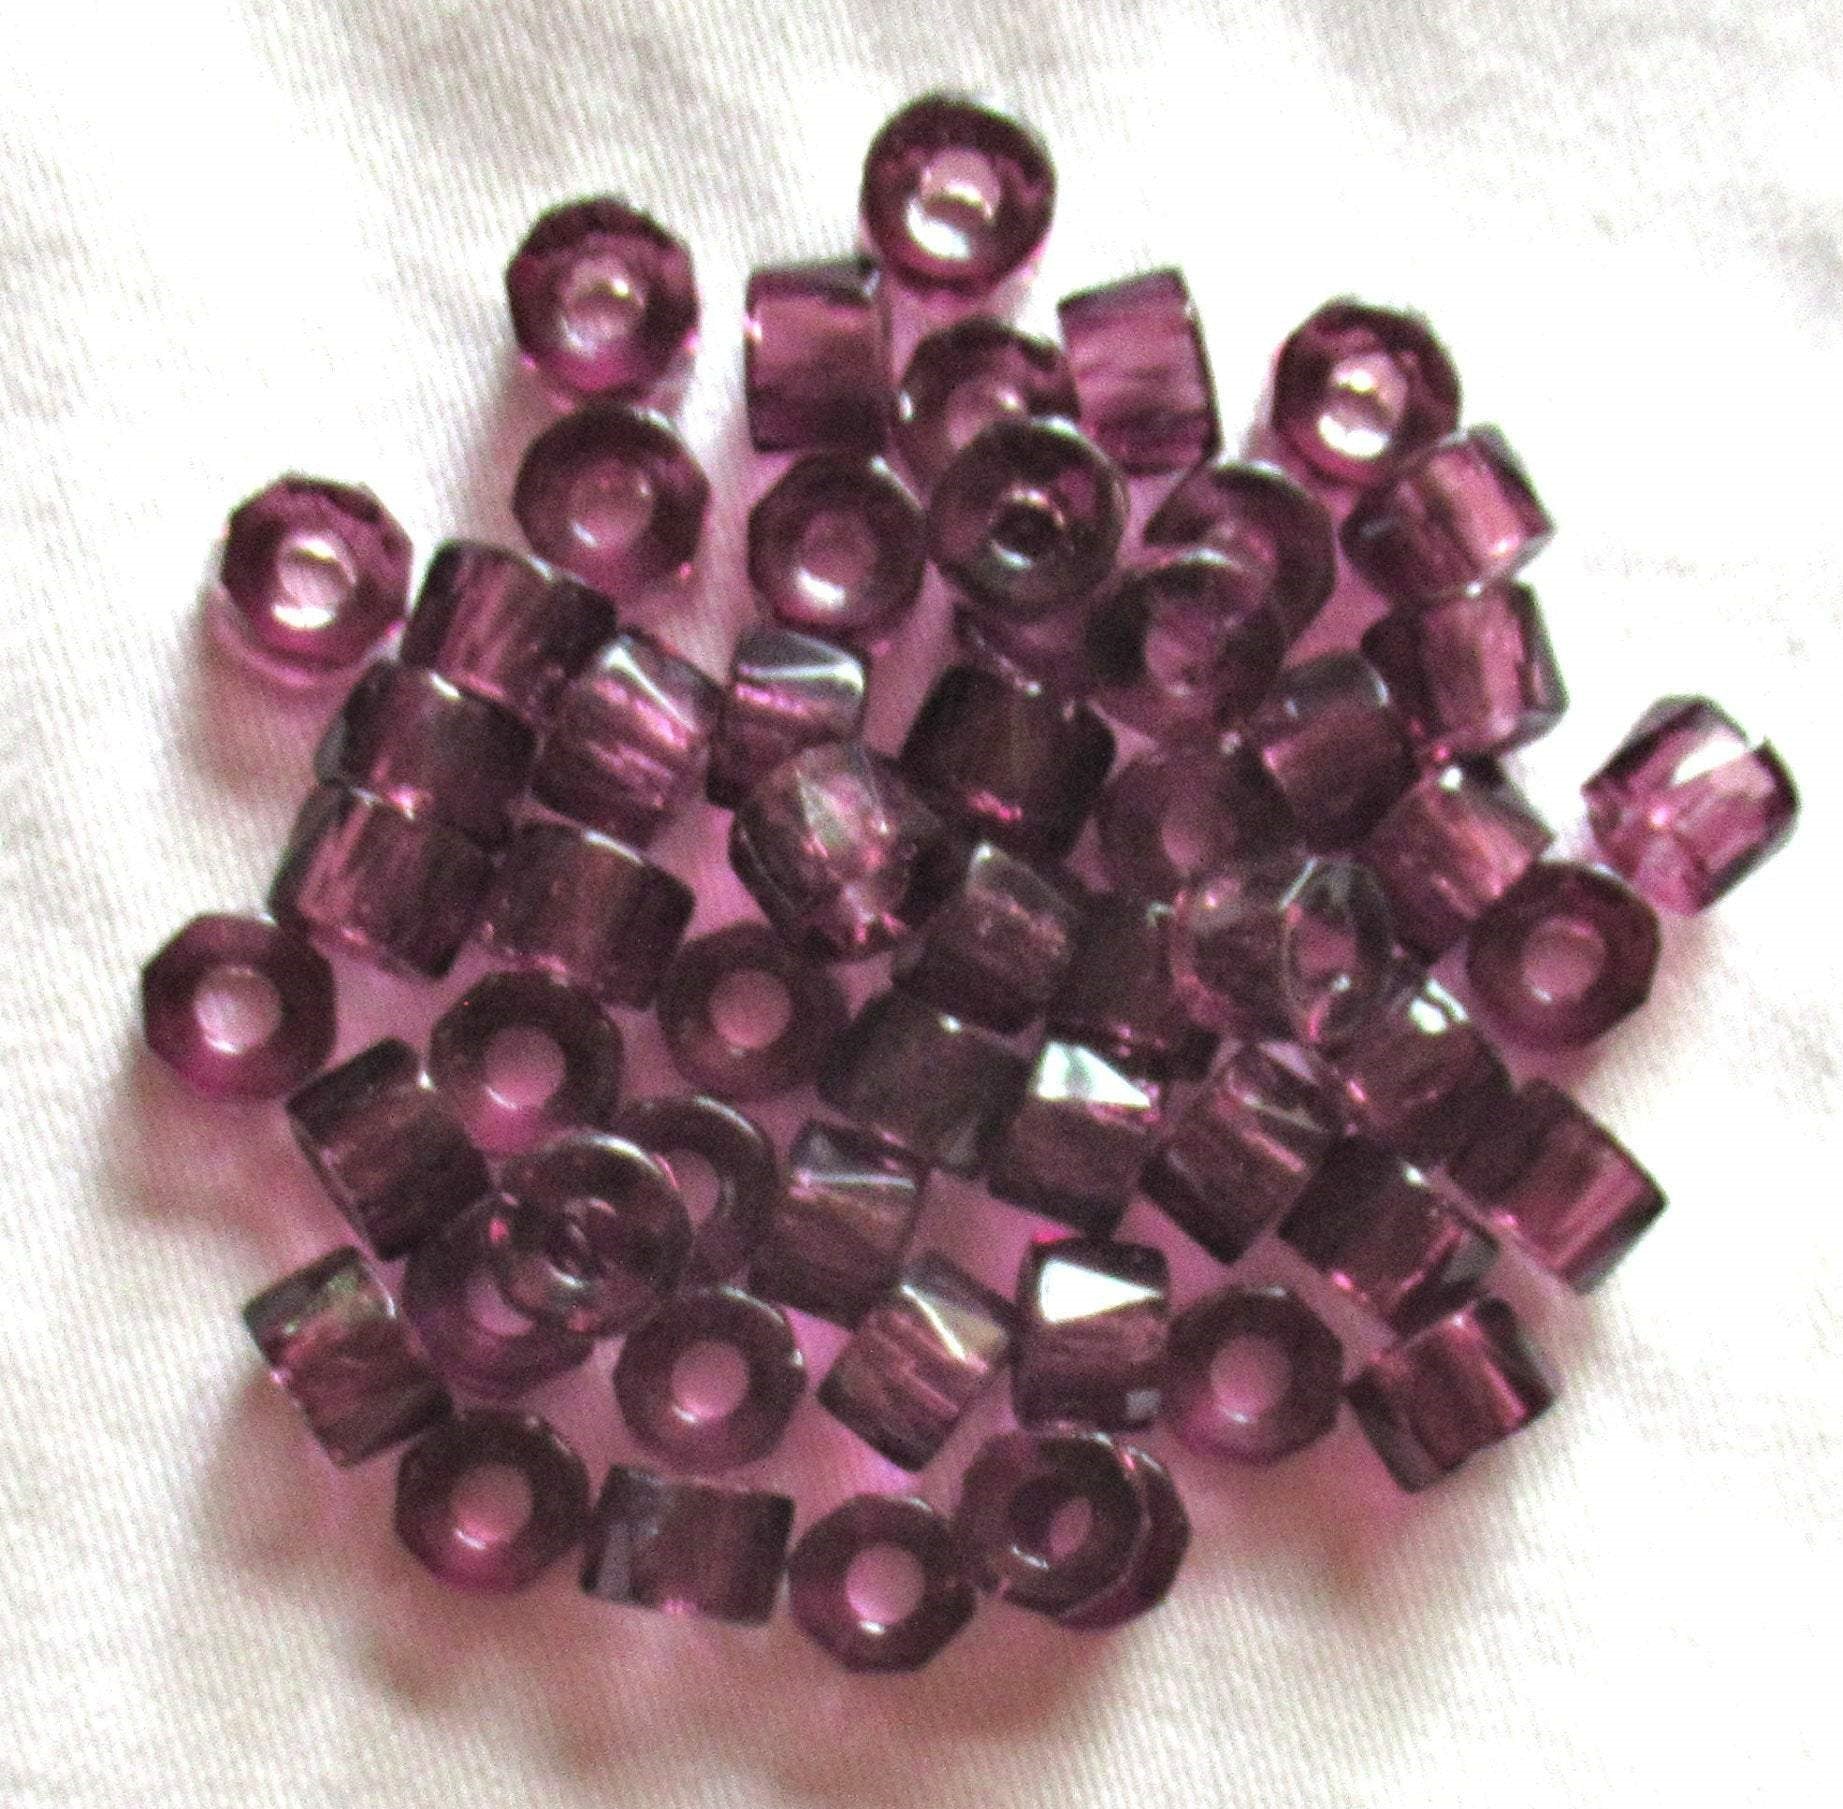 Star Beads Purple Large Hole Pony Beads Made in USA